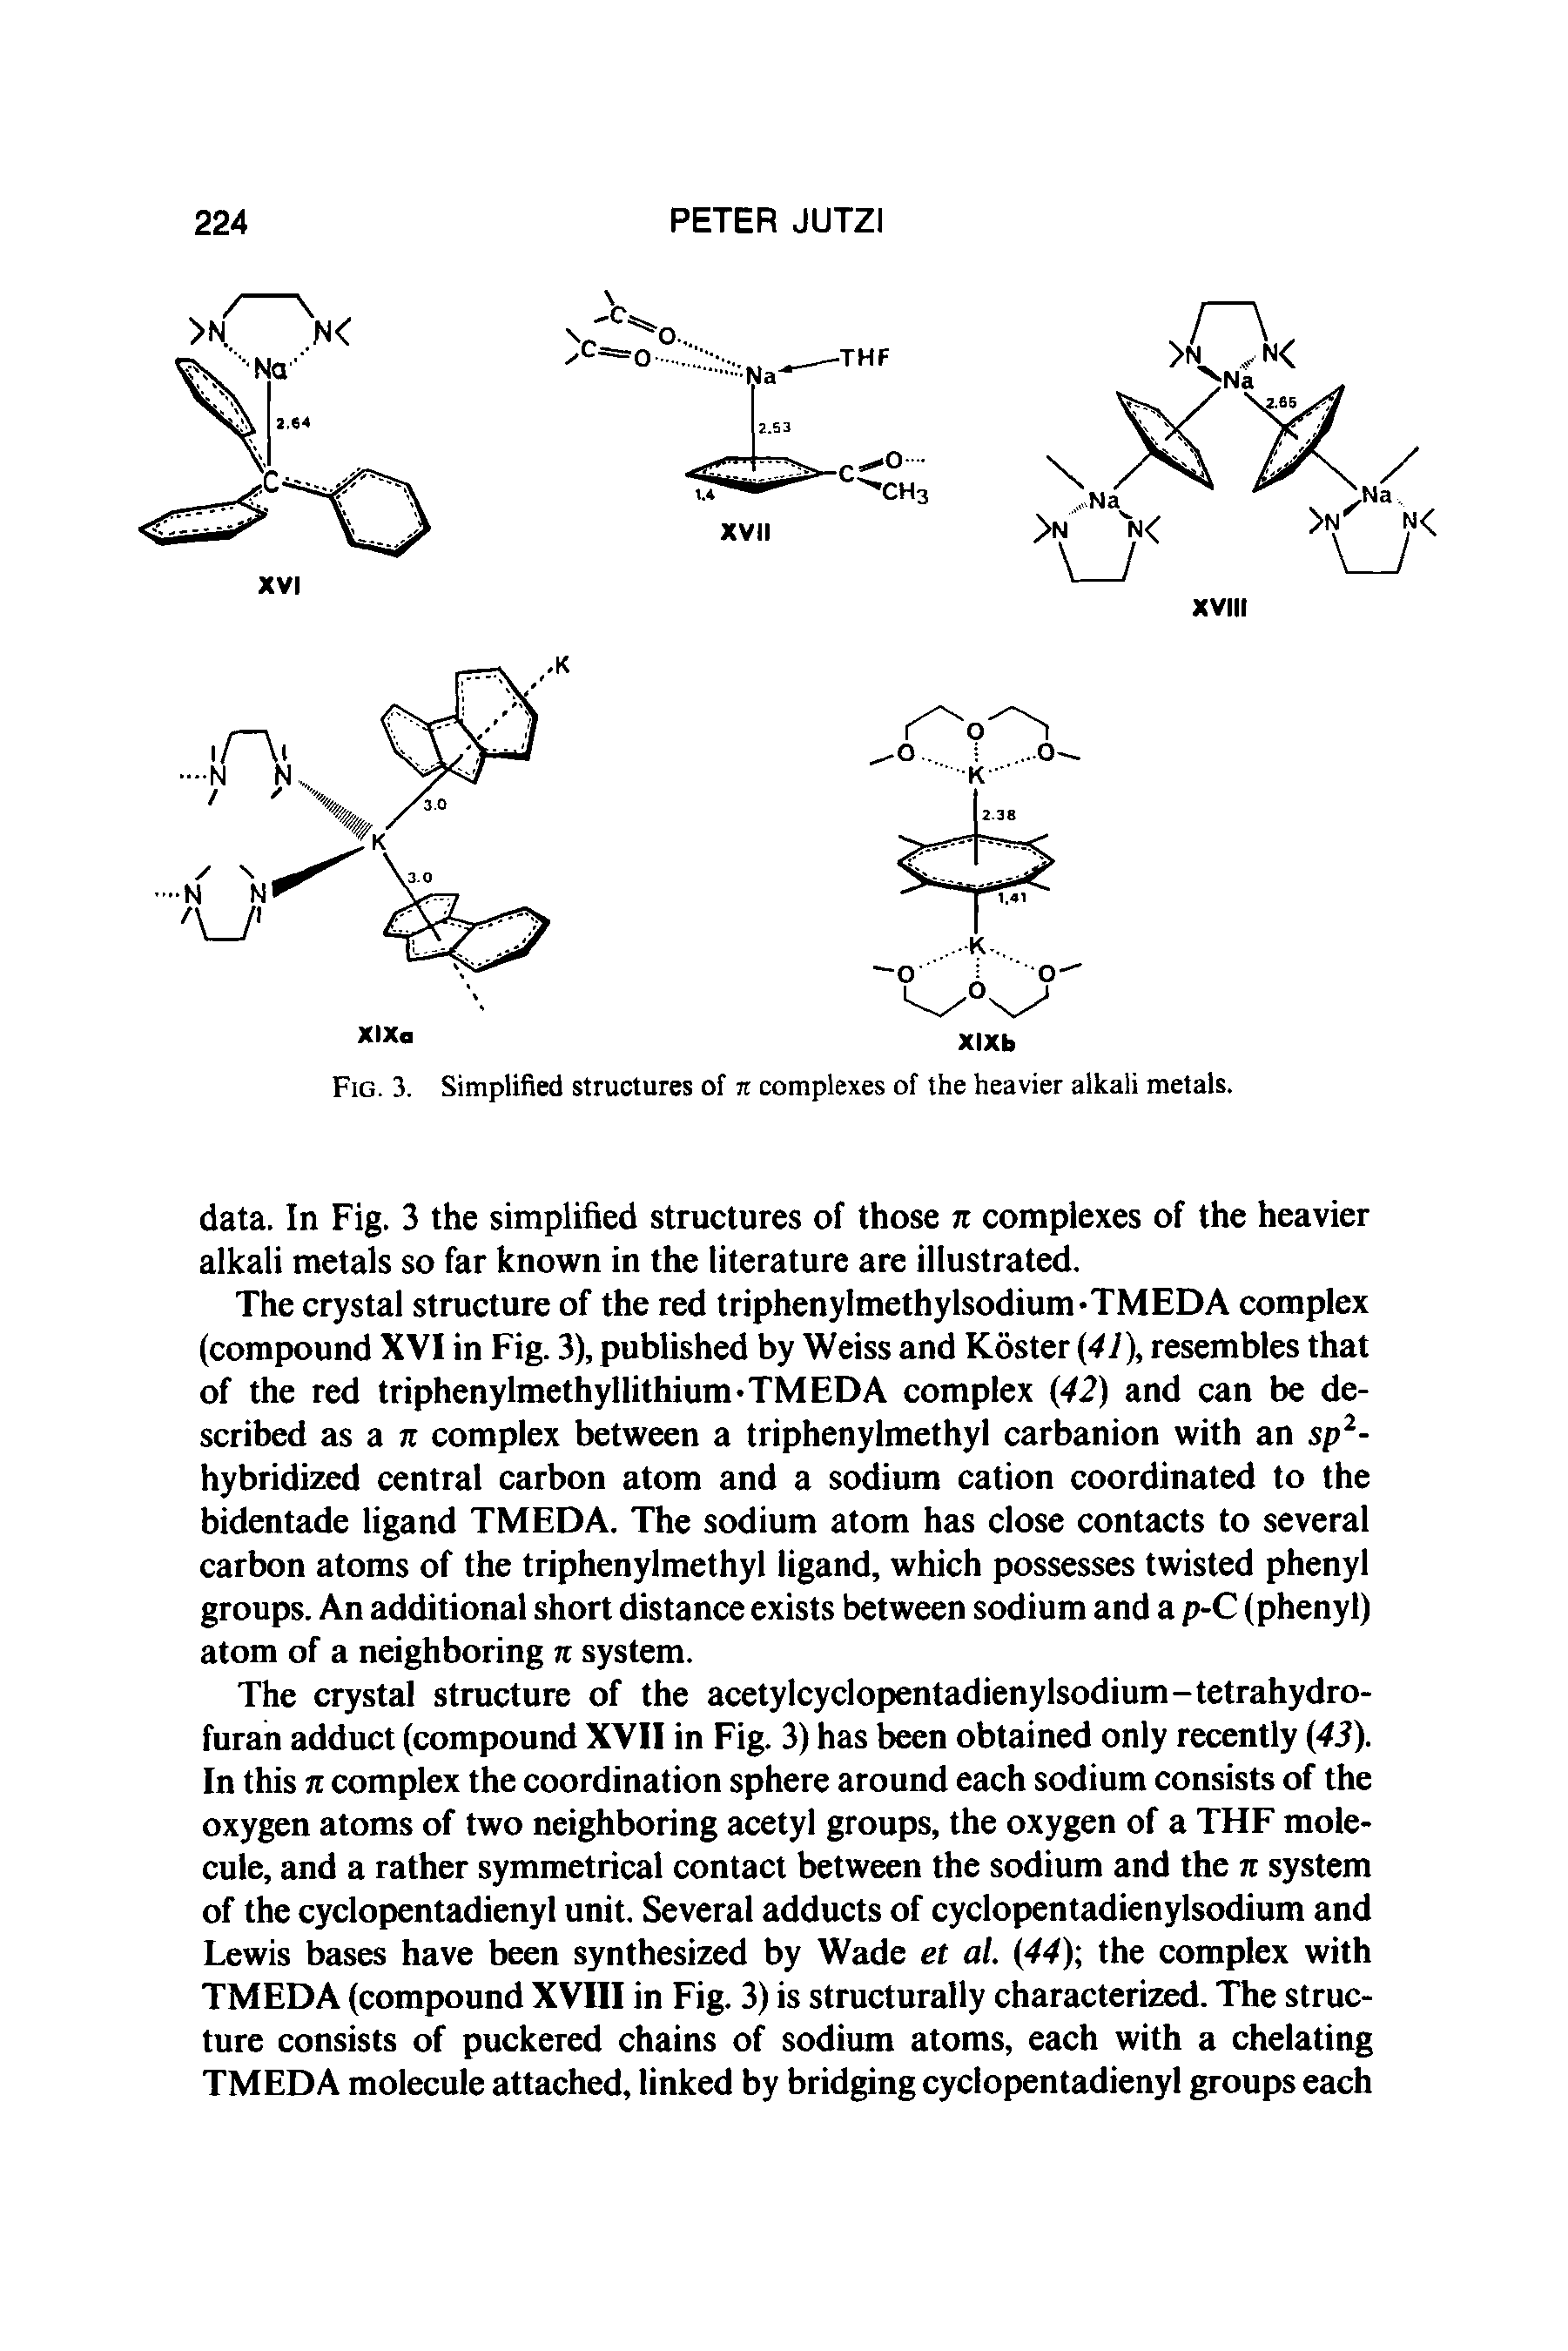 Fig. 3. Simplified structures of n complexes of the heavier alkali metals.